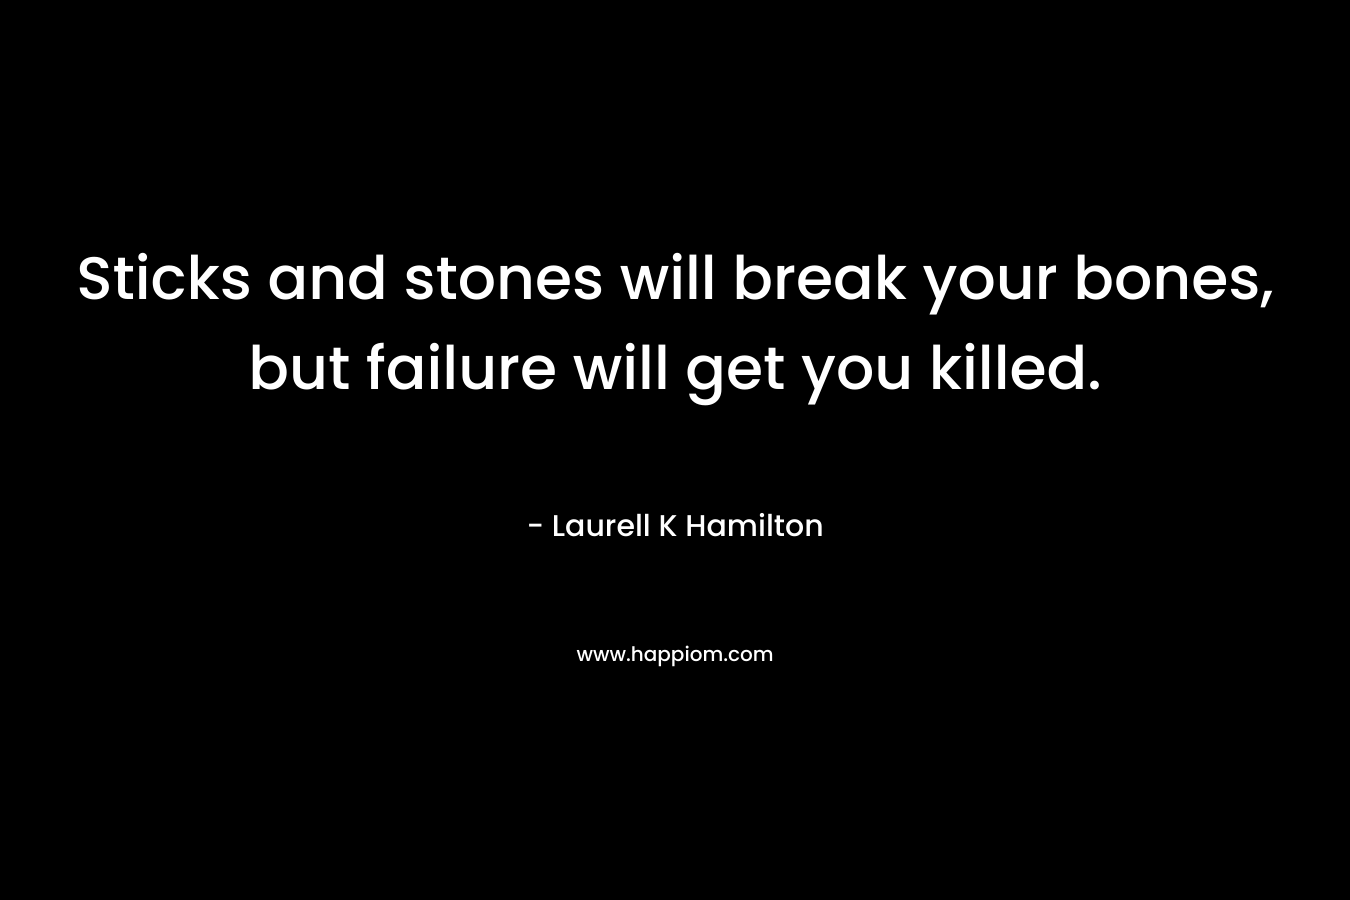 Sticks and stones will break your bones, but failure will get you killed. – Laurell K Hamilton